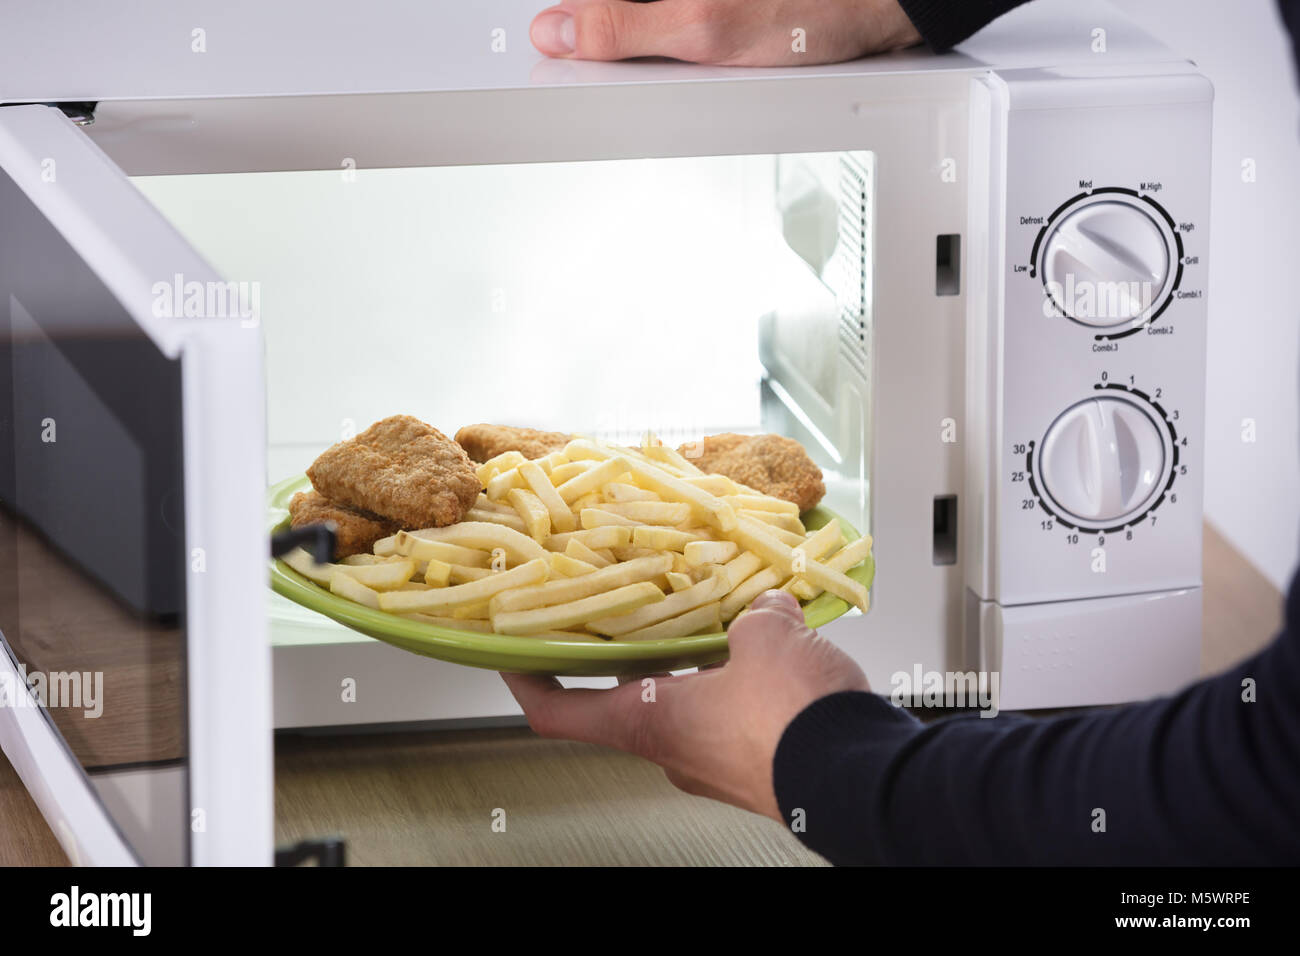 https://c8.alamy.com/comp/M5WRPE/close-up-of-a-persons-hand-putting-fried-food-inside-microwave-oven-M5WRPE.jpg